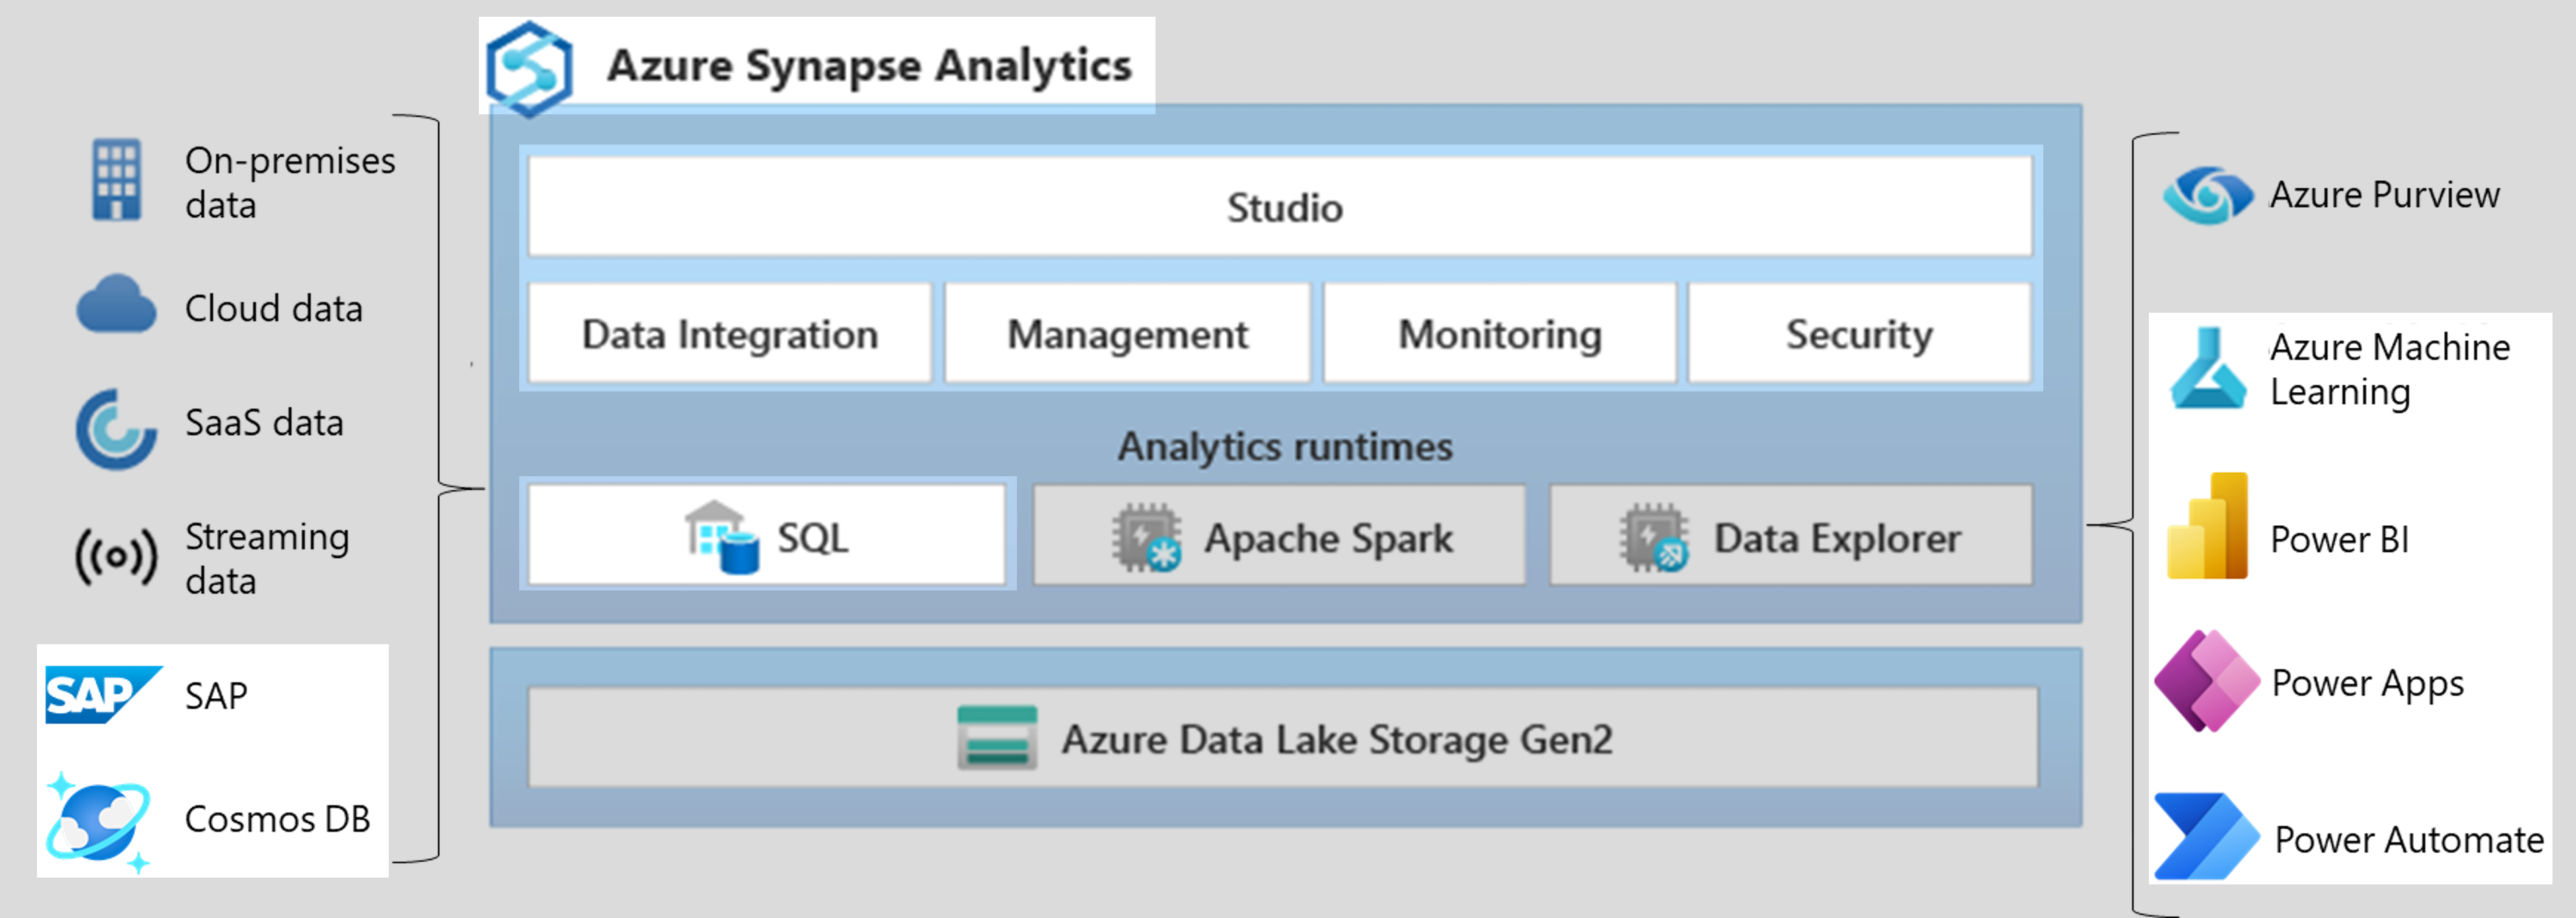 Diagram displaying components of Azure Synapse Analytics, along with potential data sources on the left, and Azure services that are deeply integrated with Azure Synapse on the right. Highlighted components: S A P and Cosmos DB, Synapse Studio, SQL, Azure Machine Learning, Power BI, Power Apps, and Power Automate.